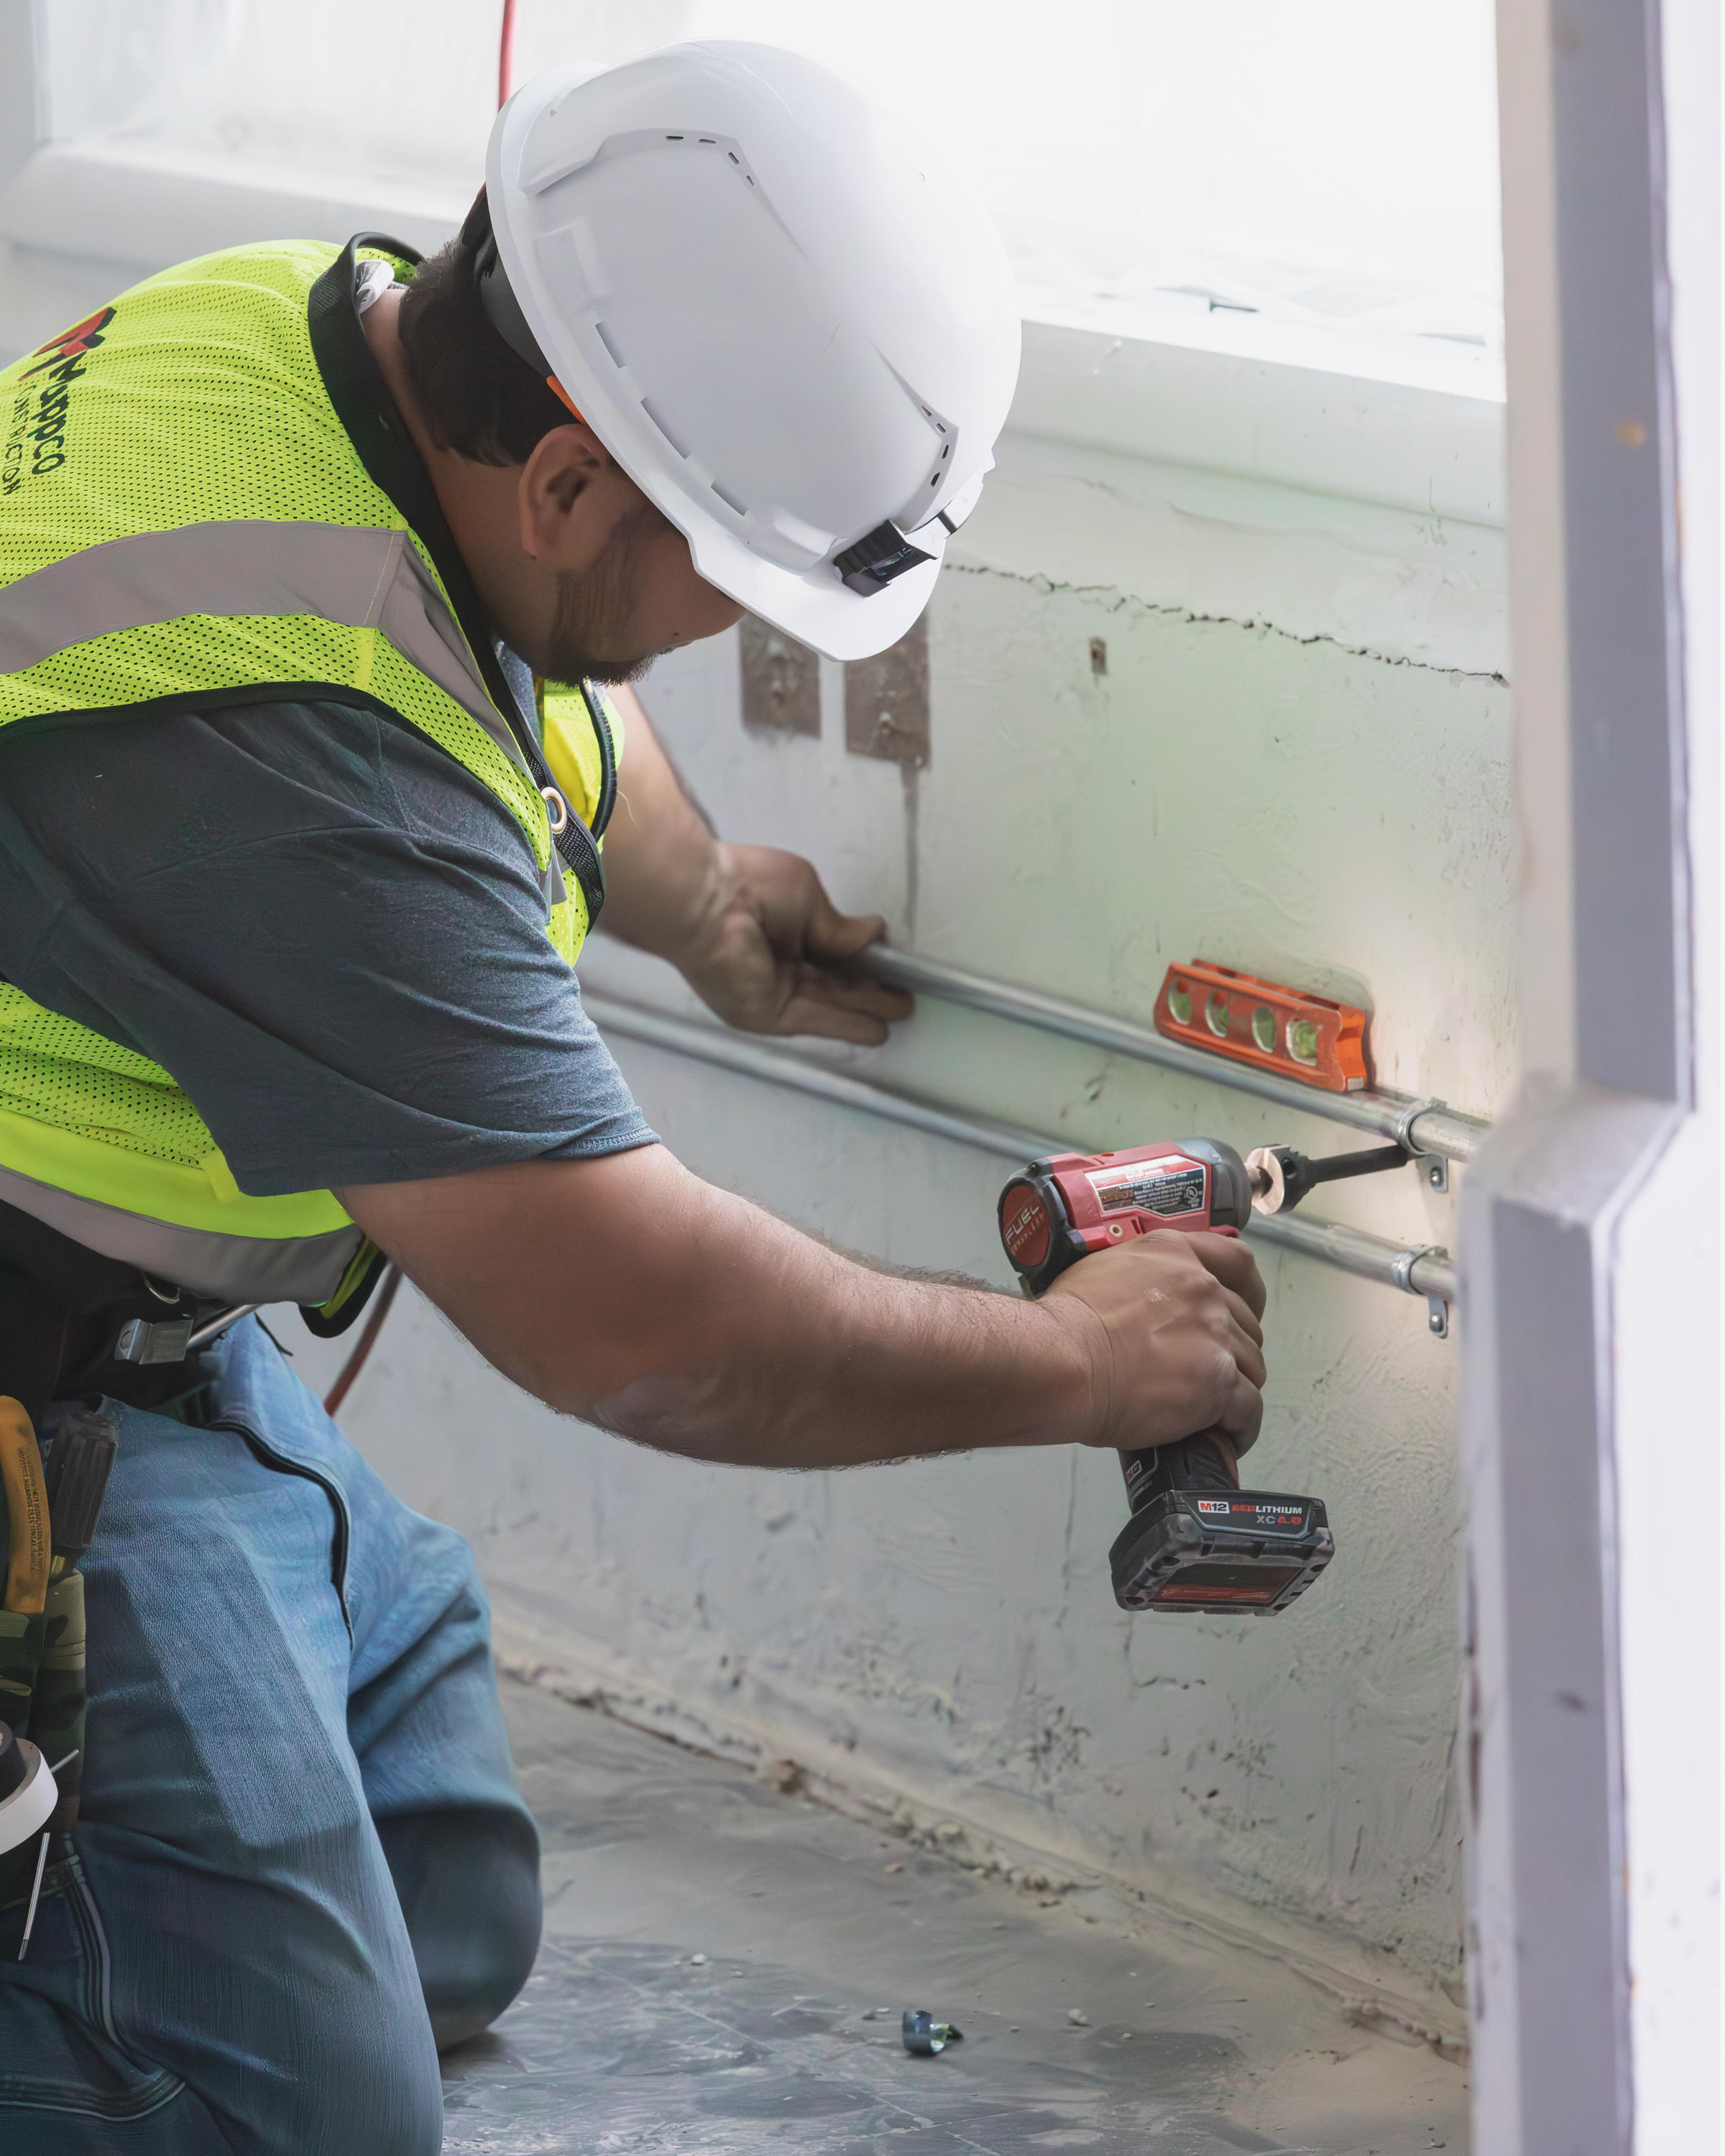 A Mappco Construction professional is diligently at work, focused on securing a component with a cordless drill on an active construction site.